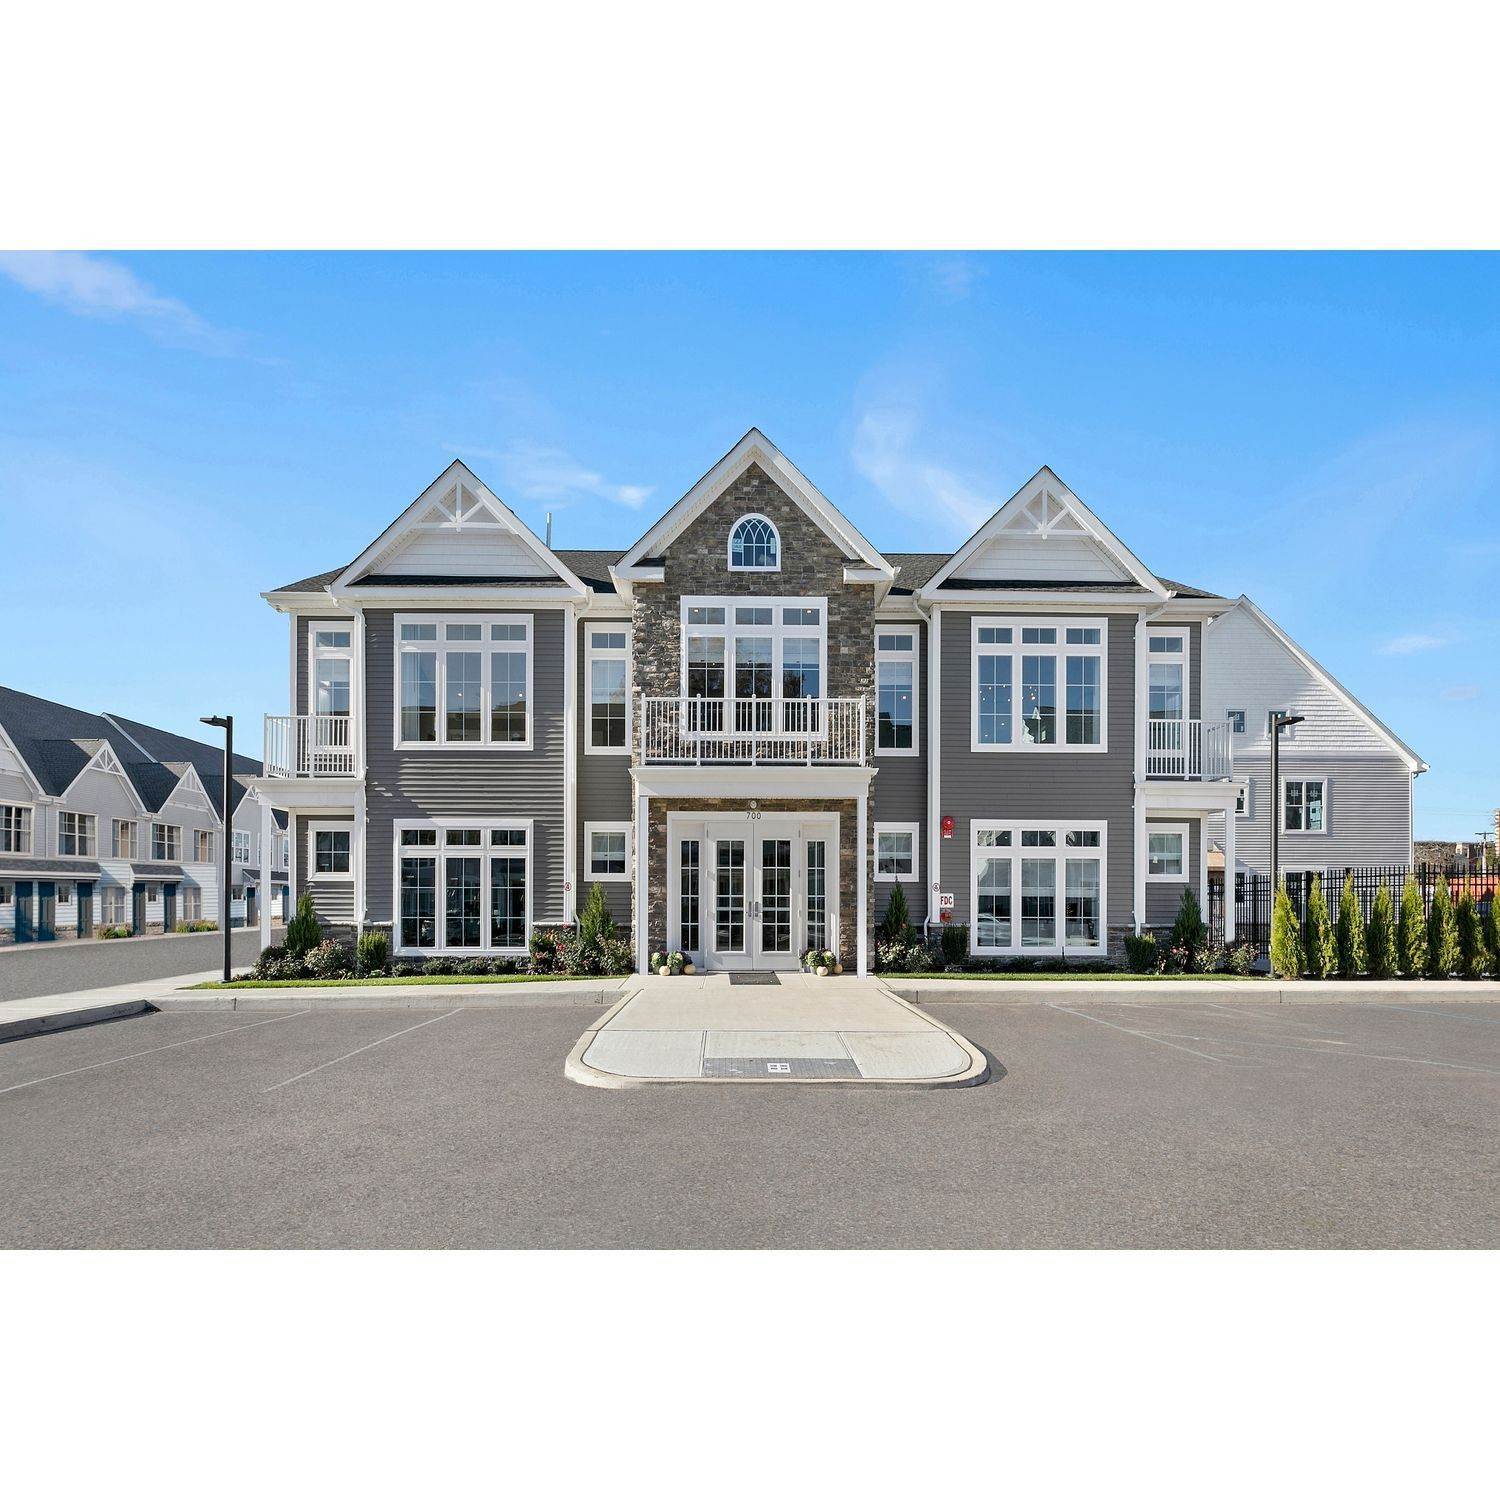 39. Meadowbrook Pointe East Meadow building at 123 Merrick Avenue, East Meadow, NY 11554